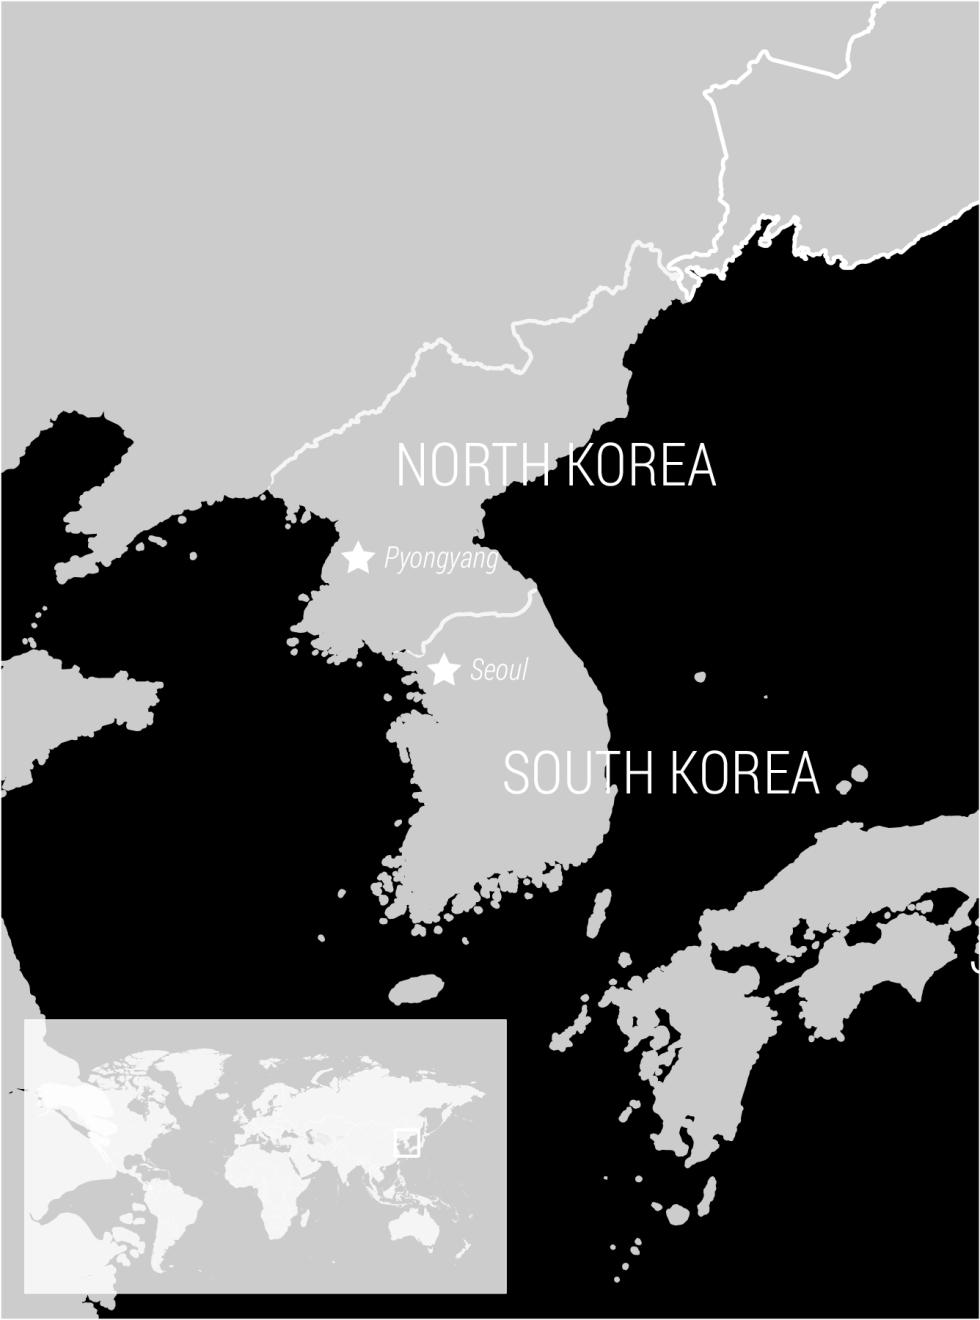 During June 2016, Wikistrat ran an 11-day multistage crowdsourced simulation to explore the various pathways by which North Korea could collapse, assess which